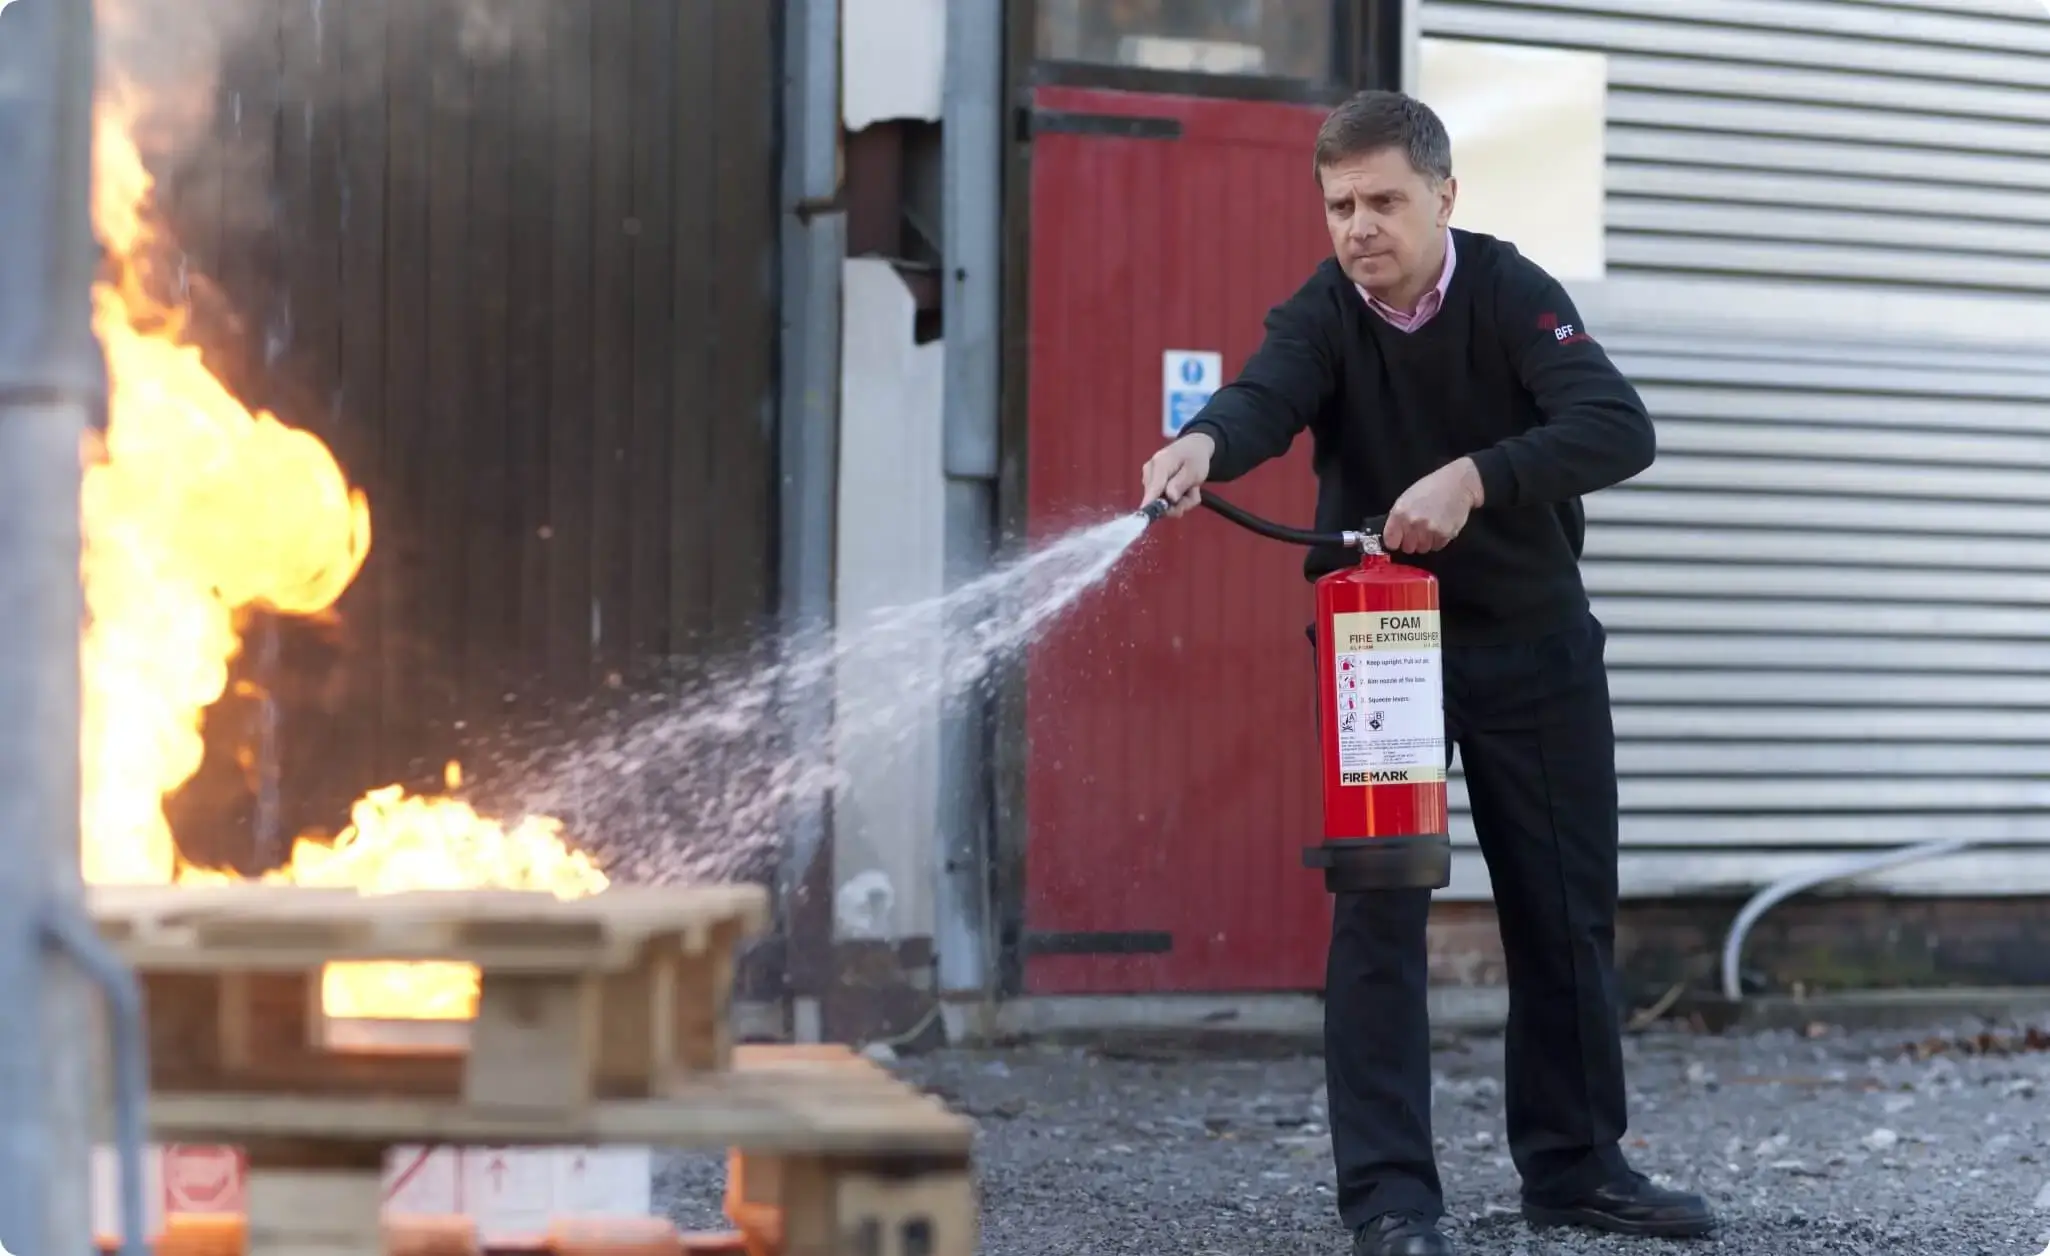 Fire Watch Services in Manchester - Ensuring Safety During High-Risk Periods ussg